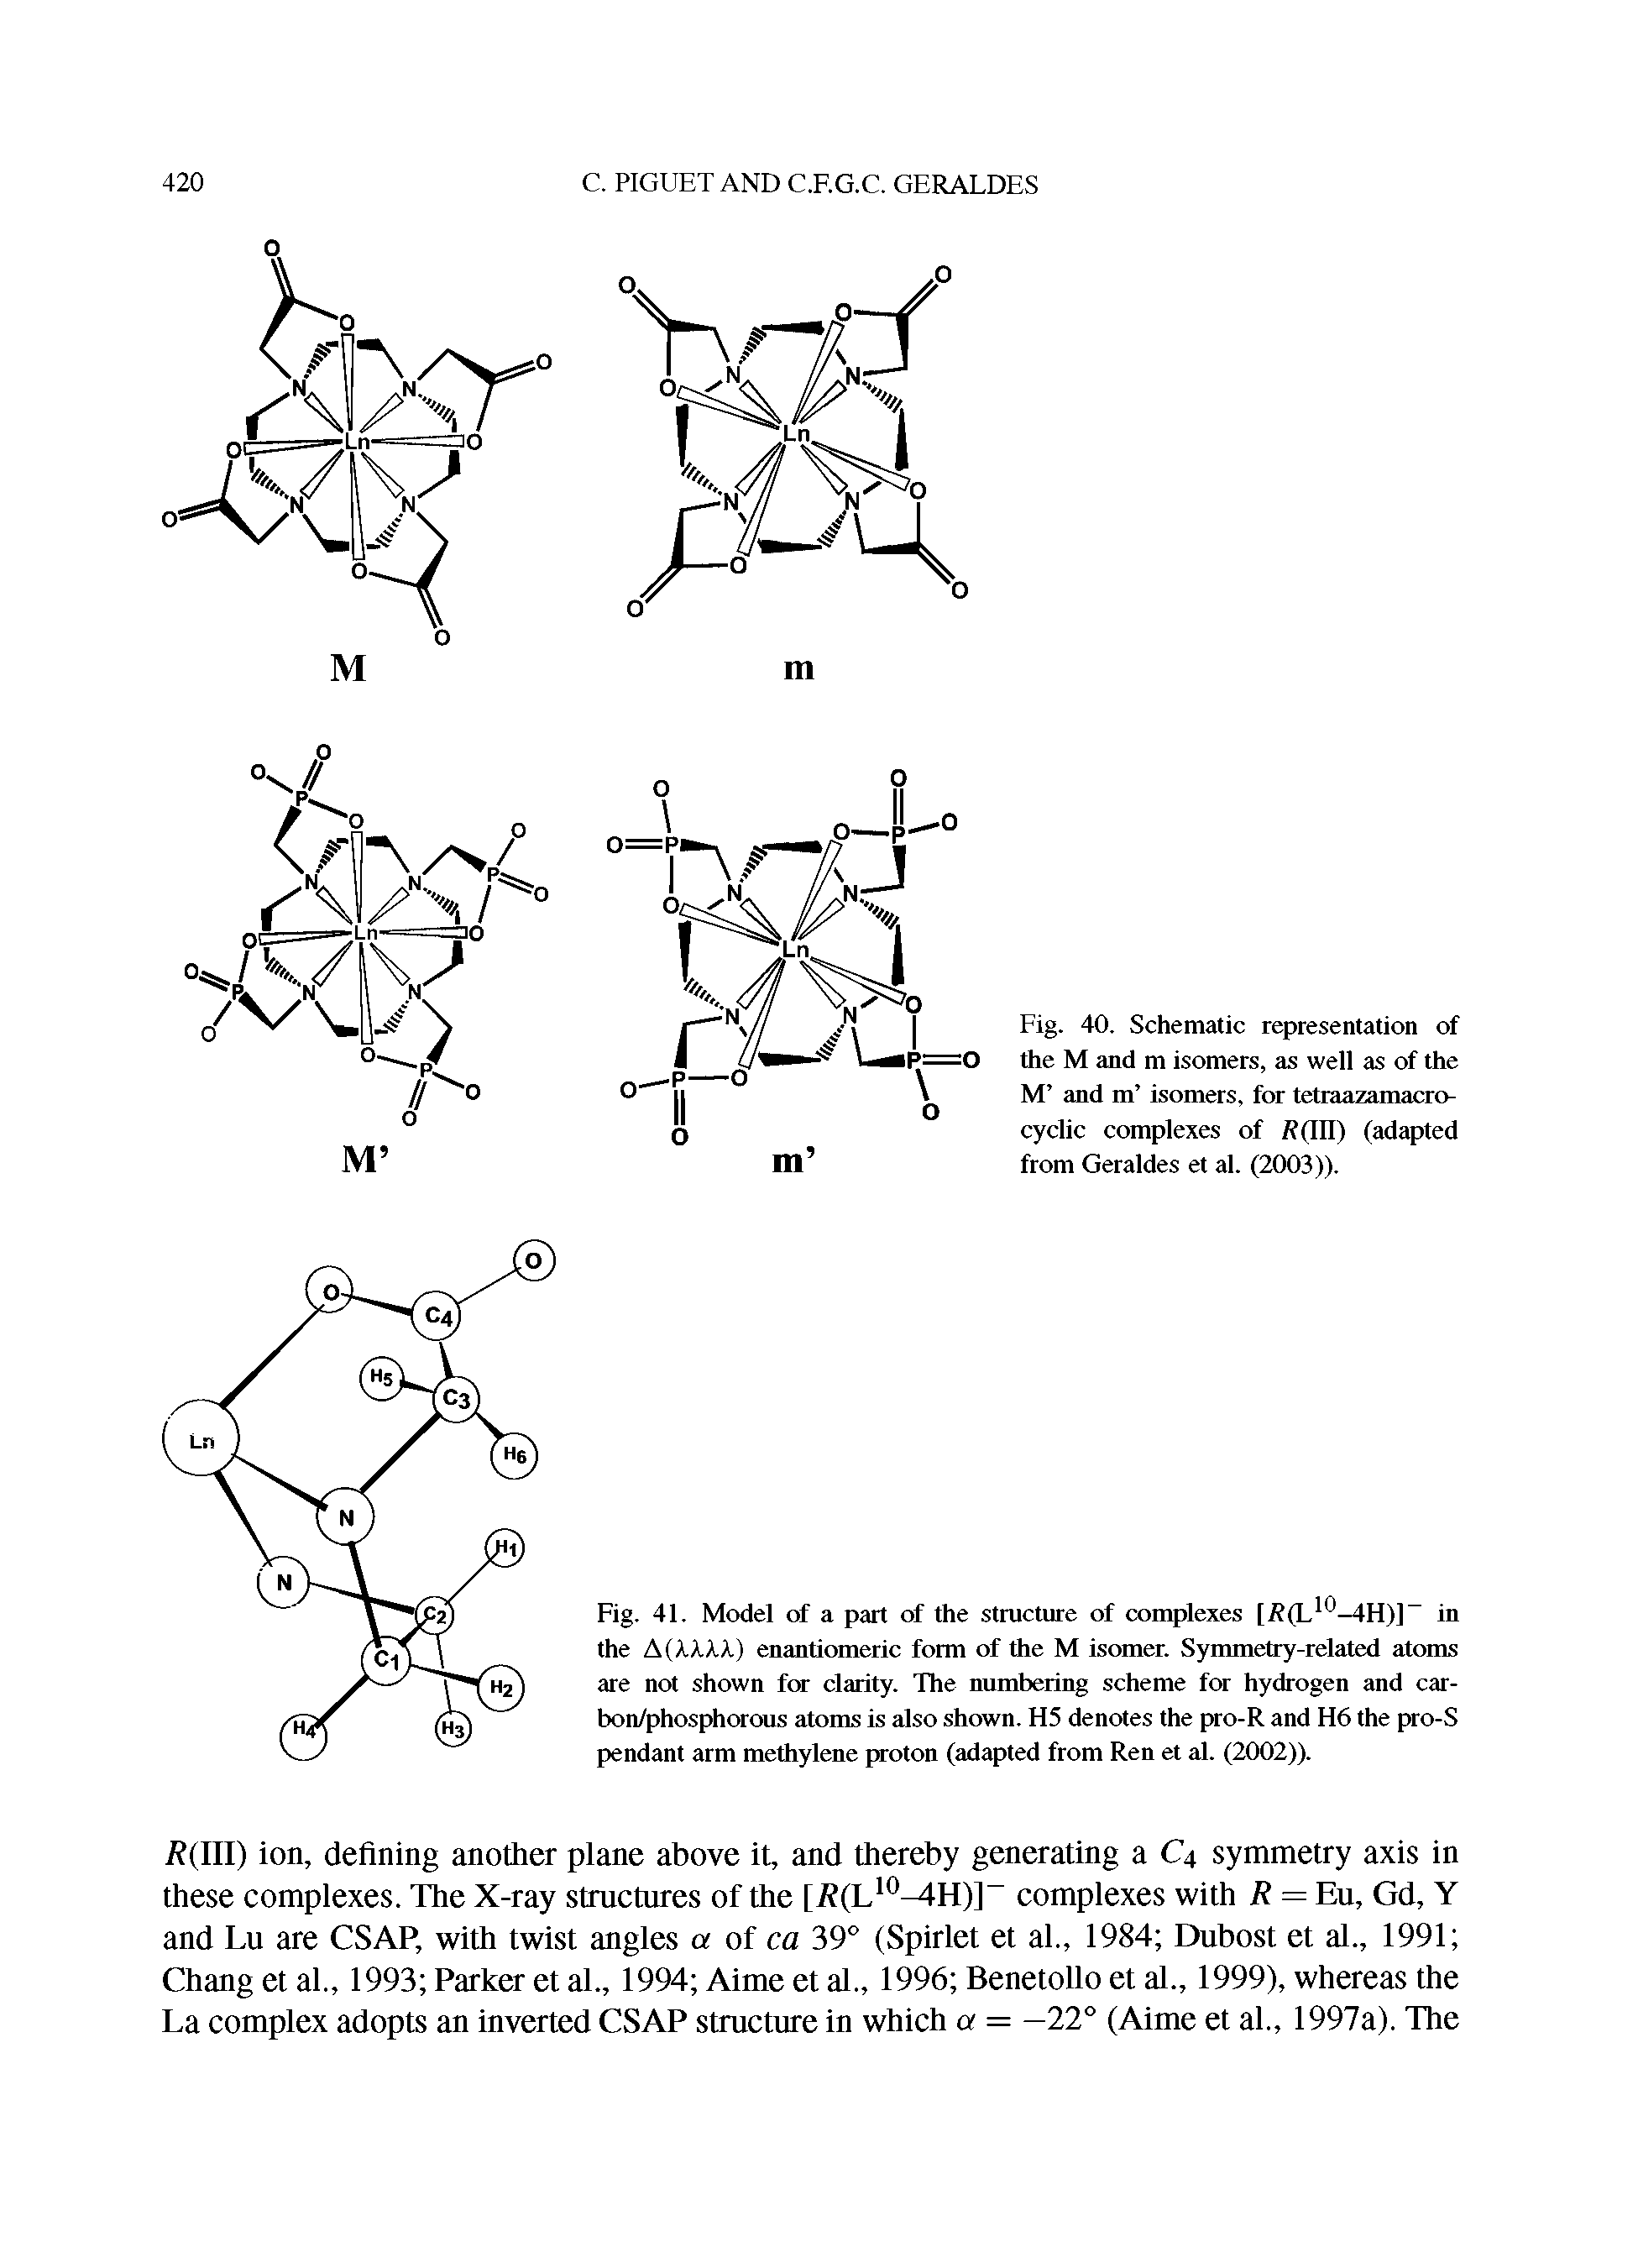 Fig. 41. Model of a part of the structure of complexes [R(L10-4H)] in the A(XXXX) enantiomeric form of the M isomer. Symmetry-related atoms are not shown for clarity. The numbering scheme for hydrogen and car-bon/phosphorous atoms is also shown. H5 denotes the pro-R and H6 the pro-S pendant arm methylene proton (adapted from Ren et al. (2002)).